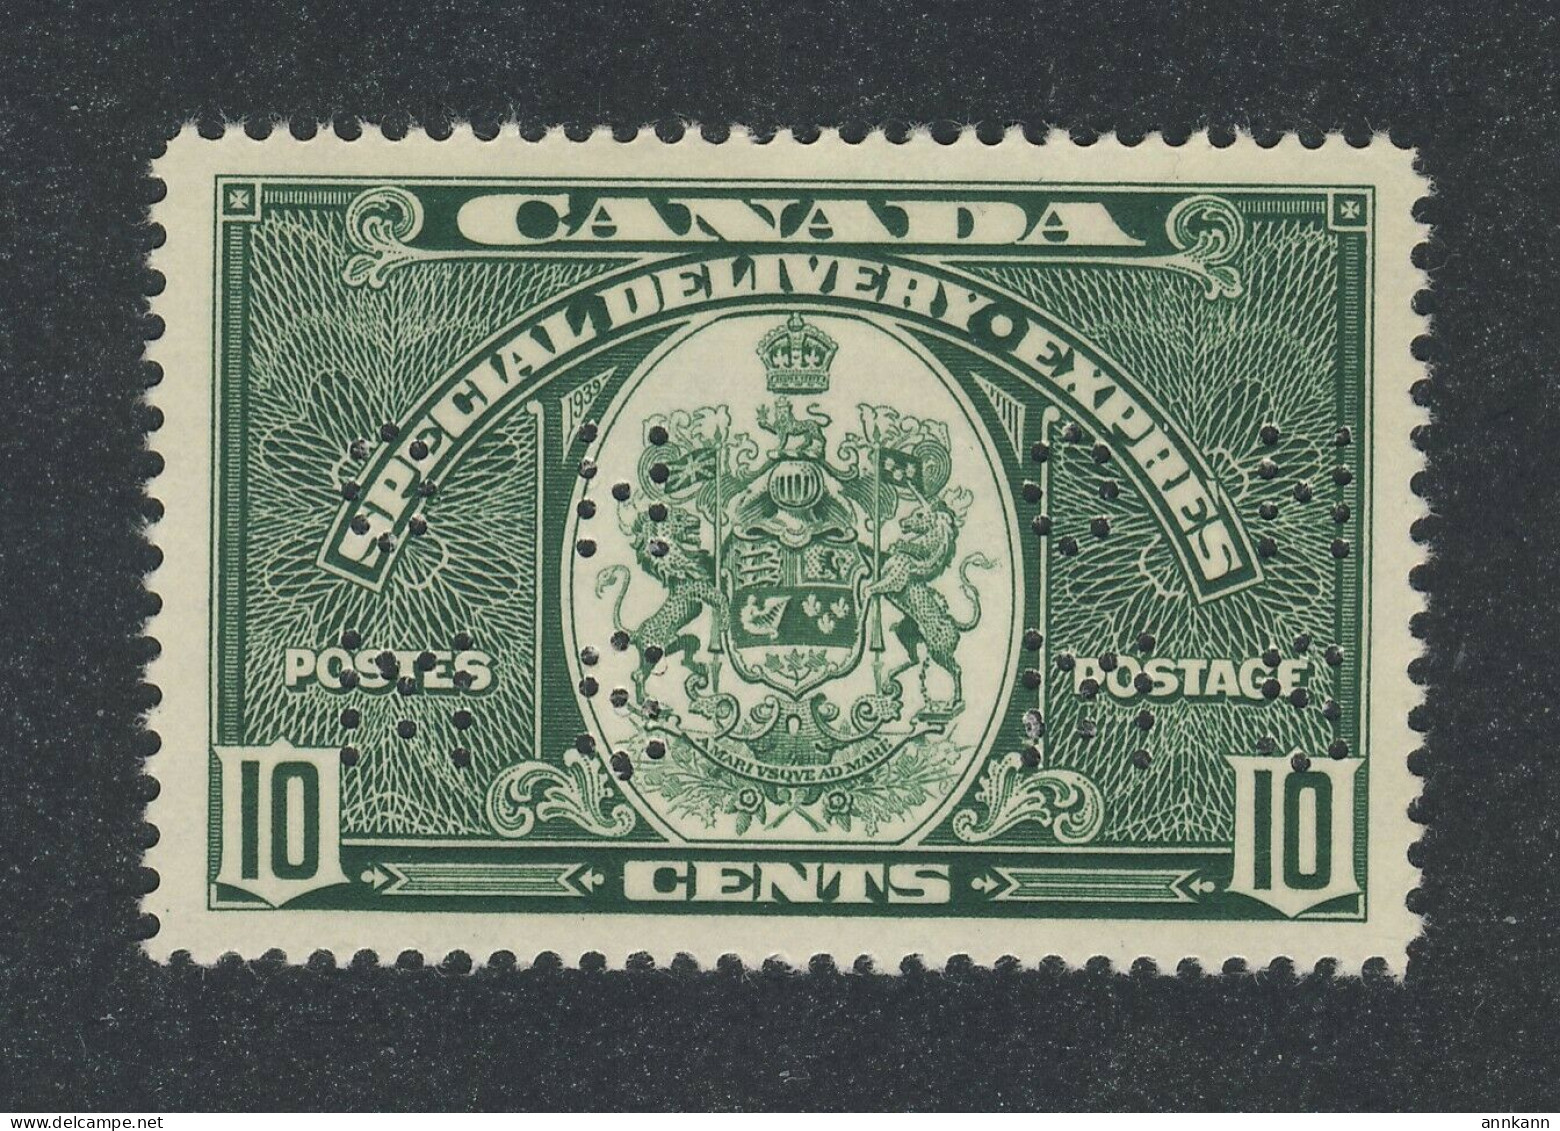 Canada Special Delivery Perf-In Stamp #OE7 - 10c Green MH VF GV= $30.00 - Perfins